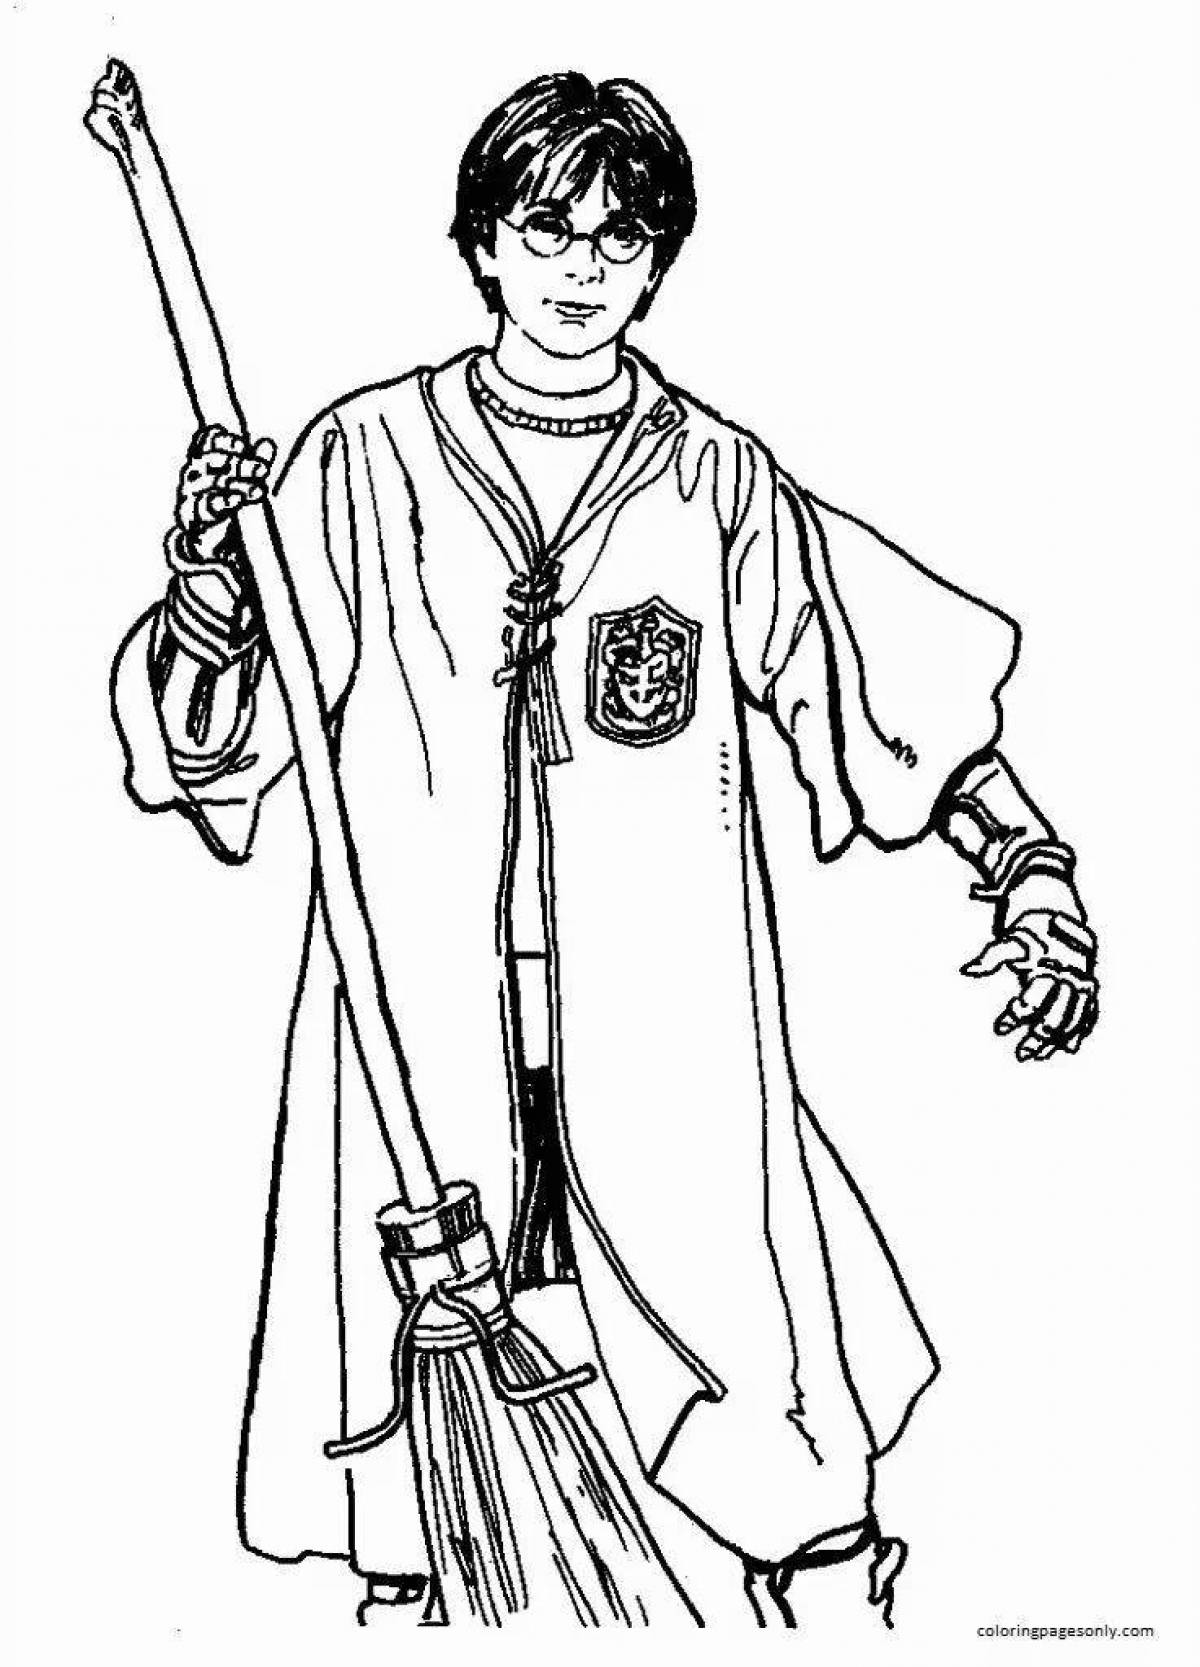 Harry Potter style coloring book for girls